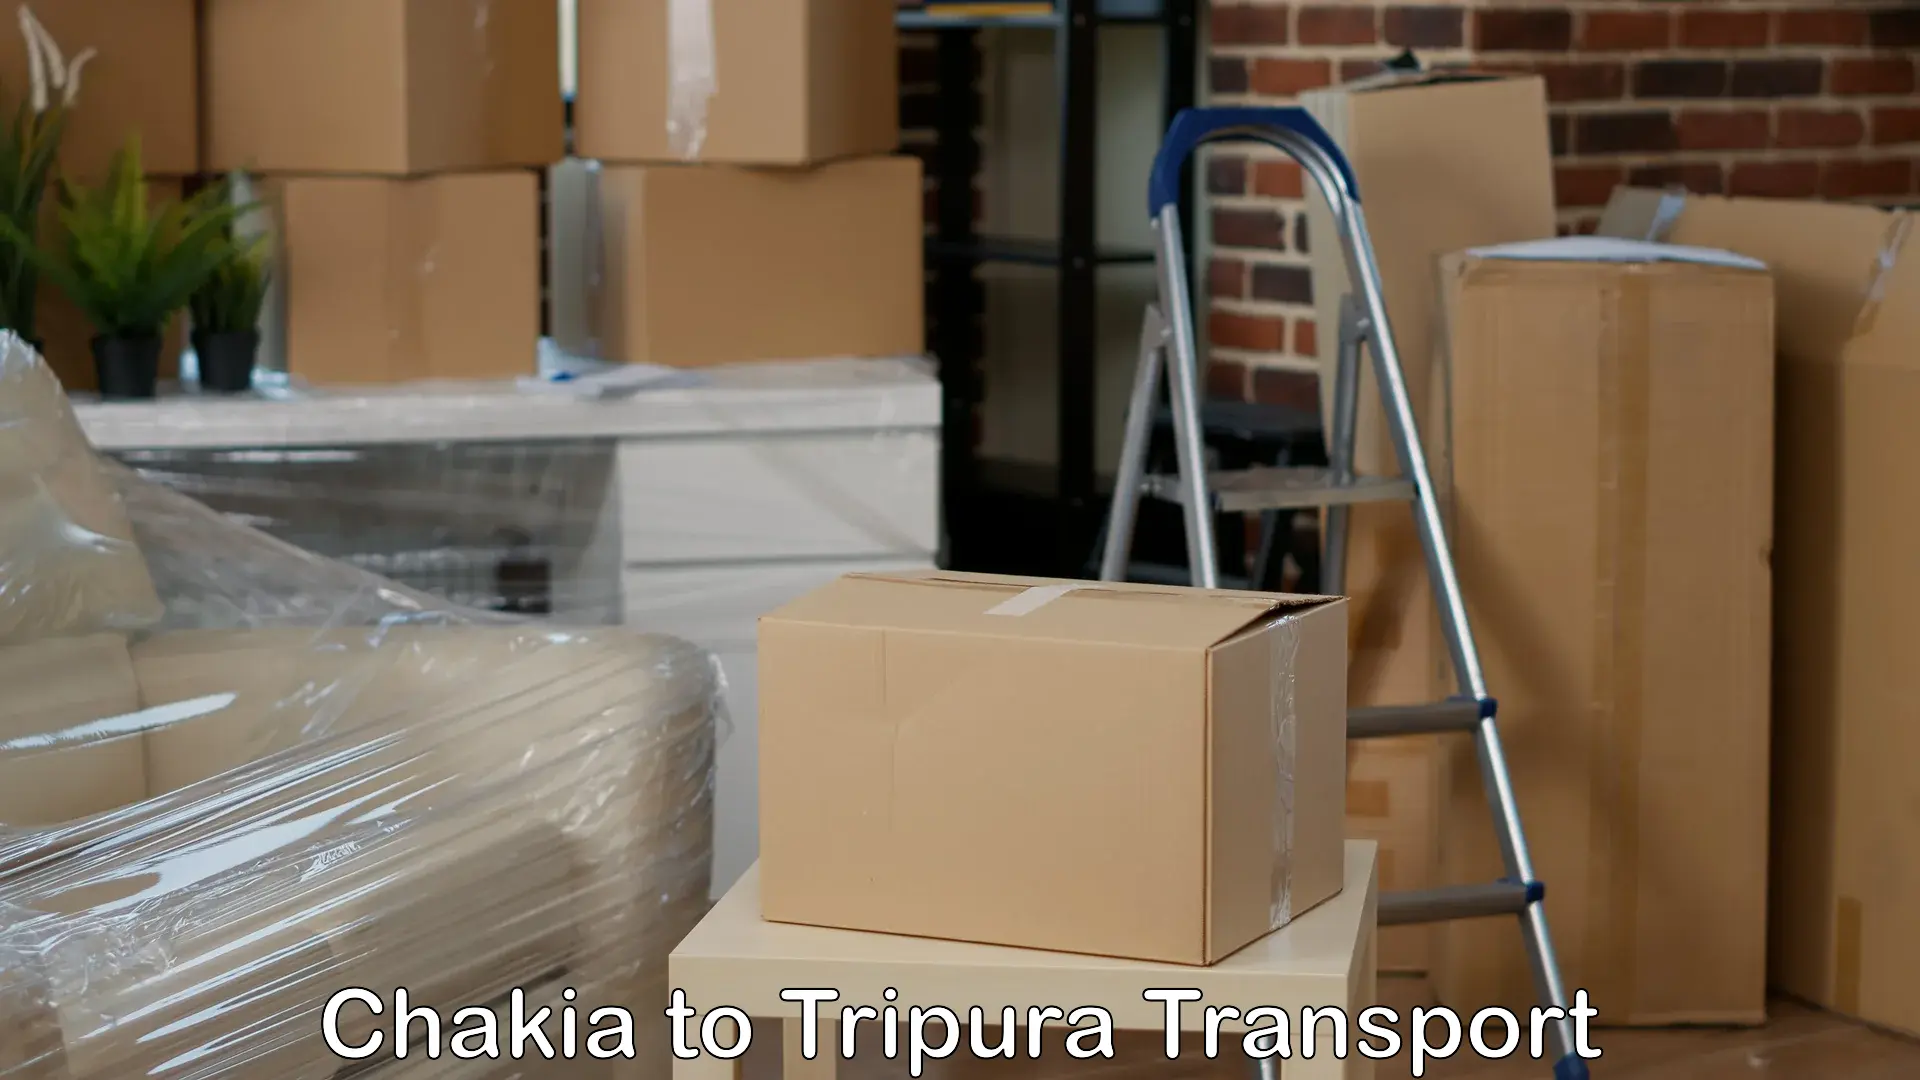 Goods delivery service Chakia to Udaipur Tripura